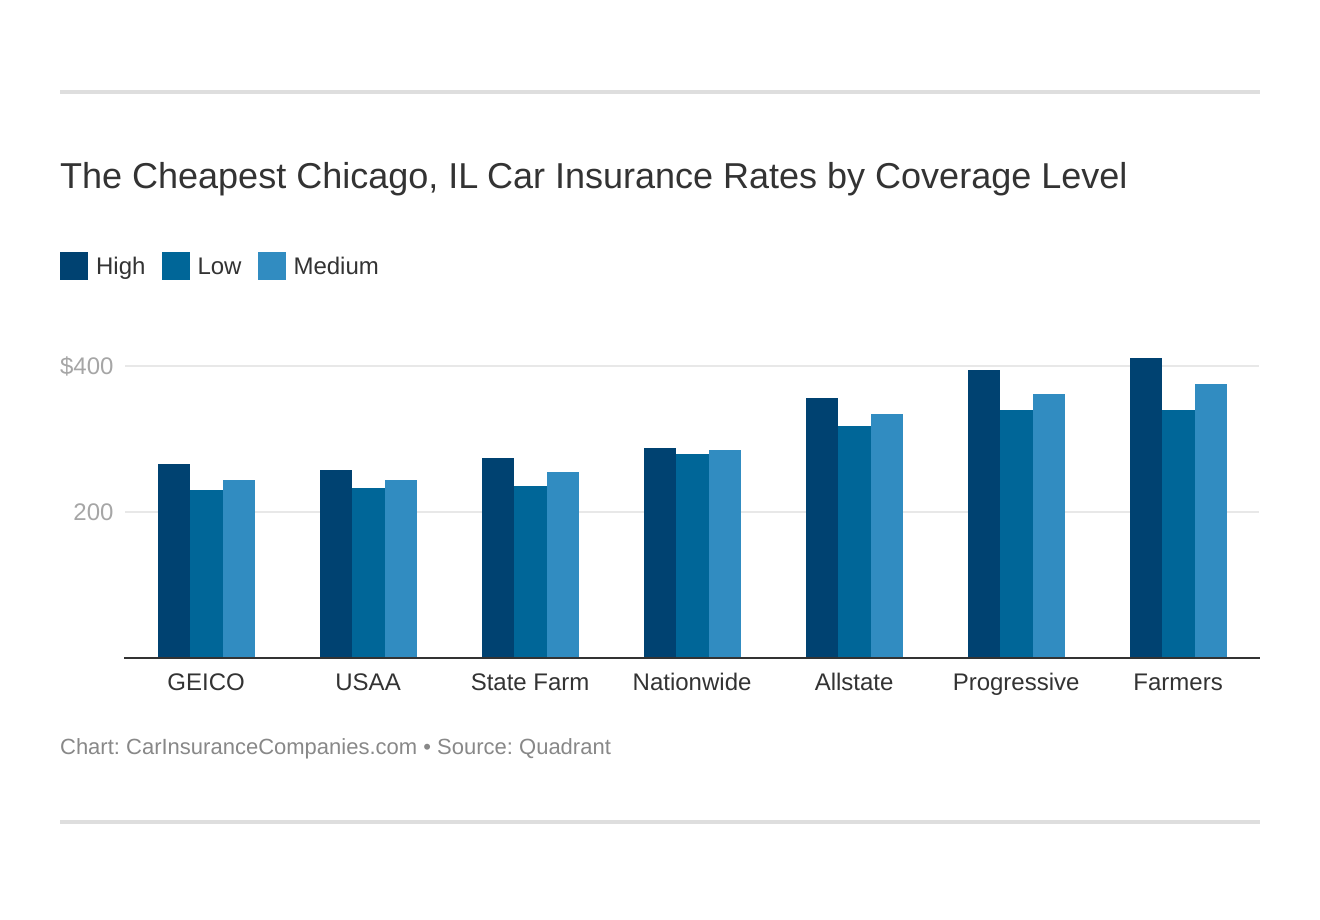 The Cheapest Chicago, IL Car Insurance Rates by Coverage Level